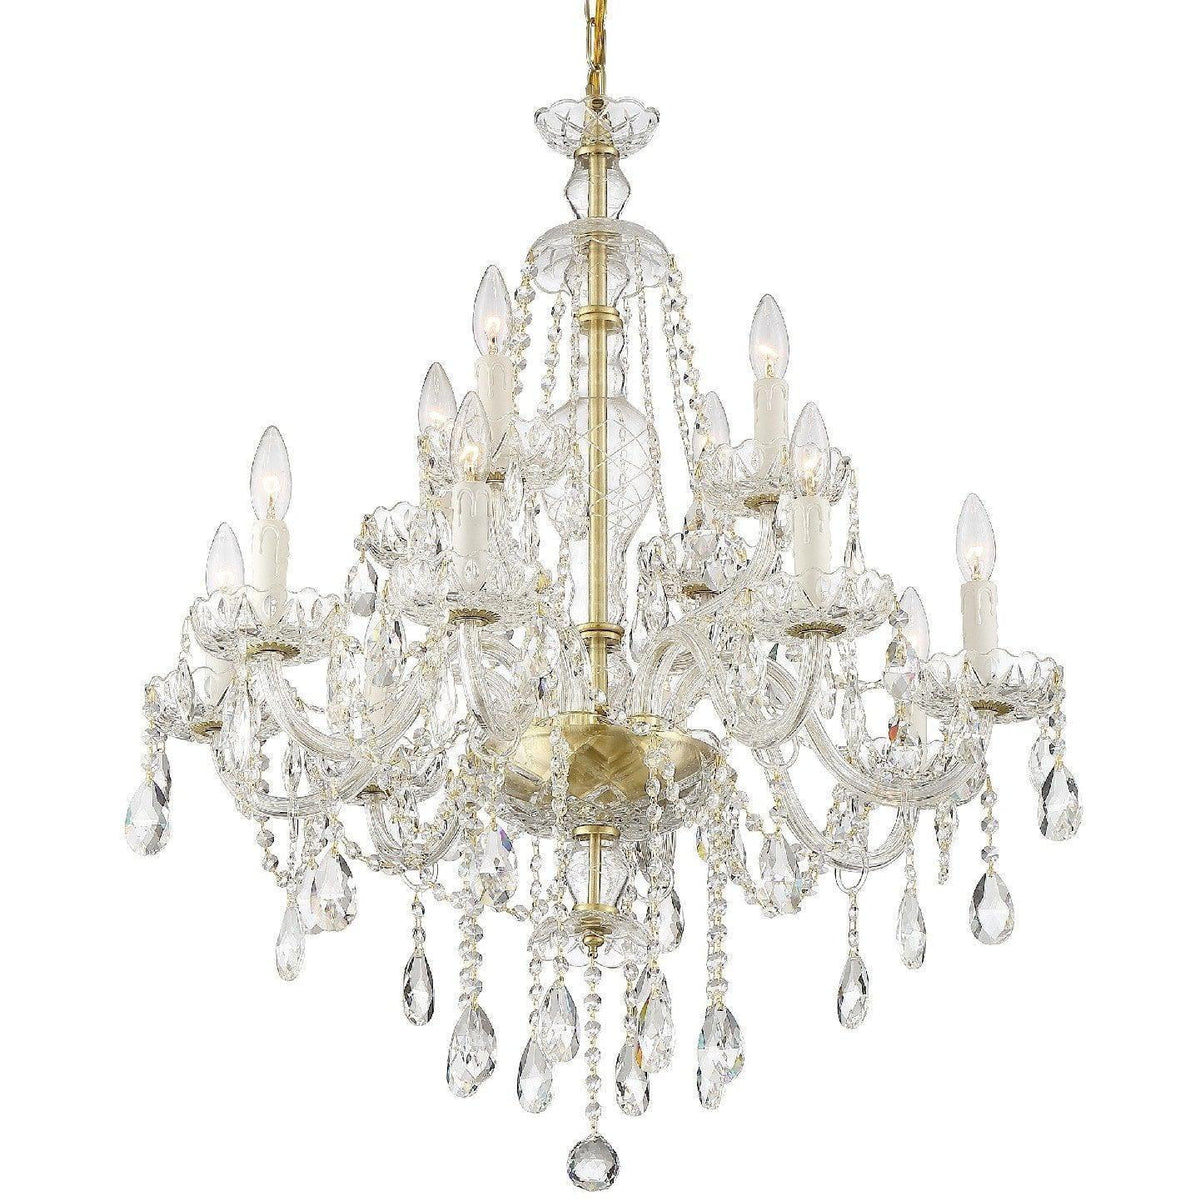 Crystorama - Candace 12 Light Chandelier - CAN-A1312-PB-CL-MWP | Montreal Lighting & Hardware